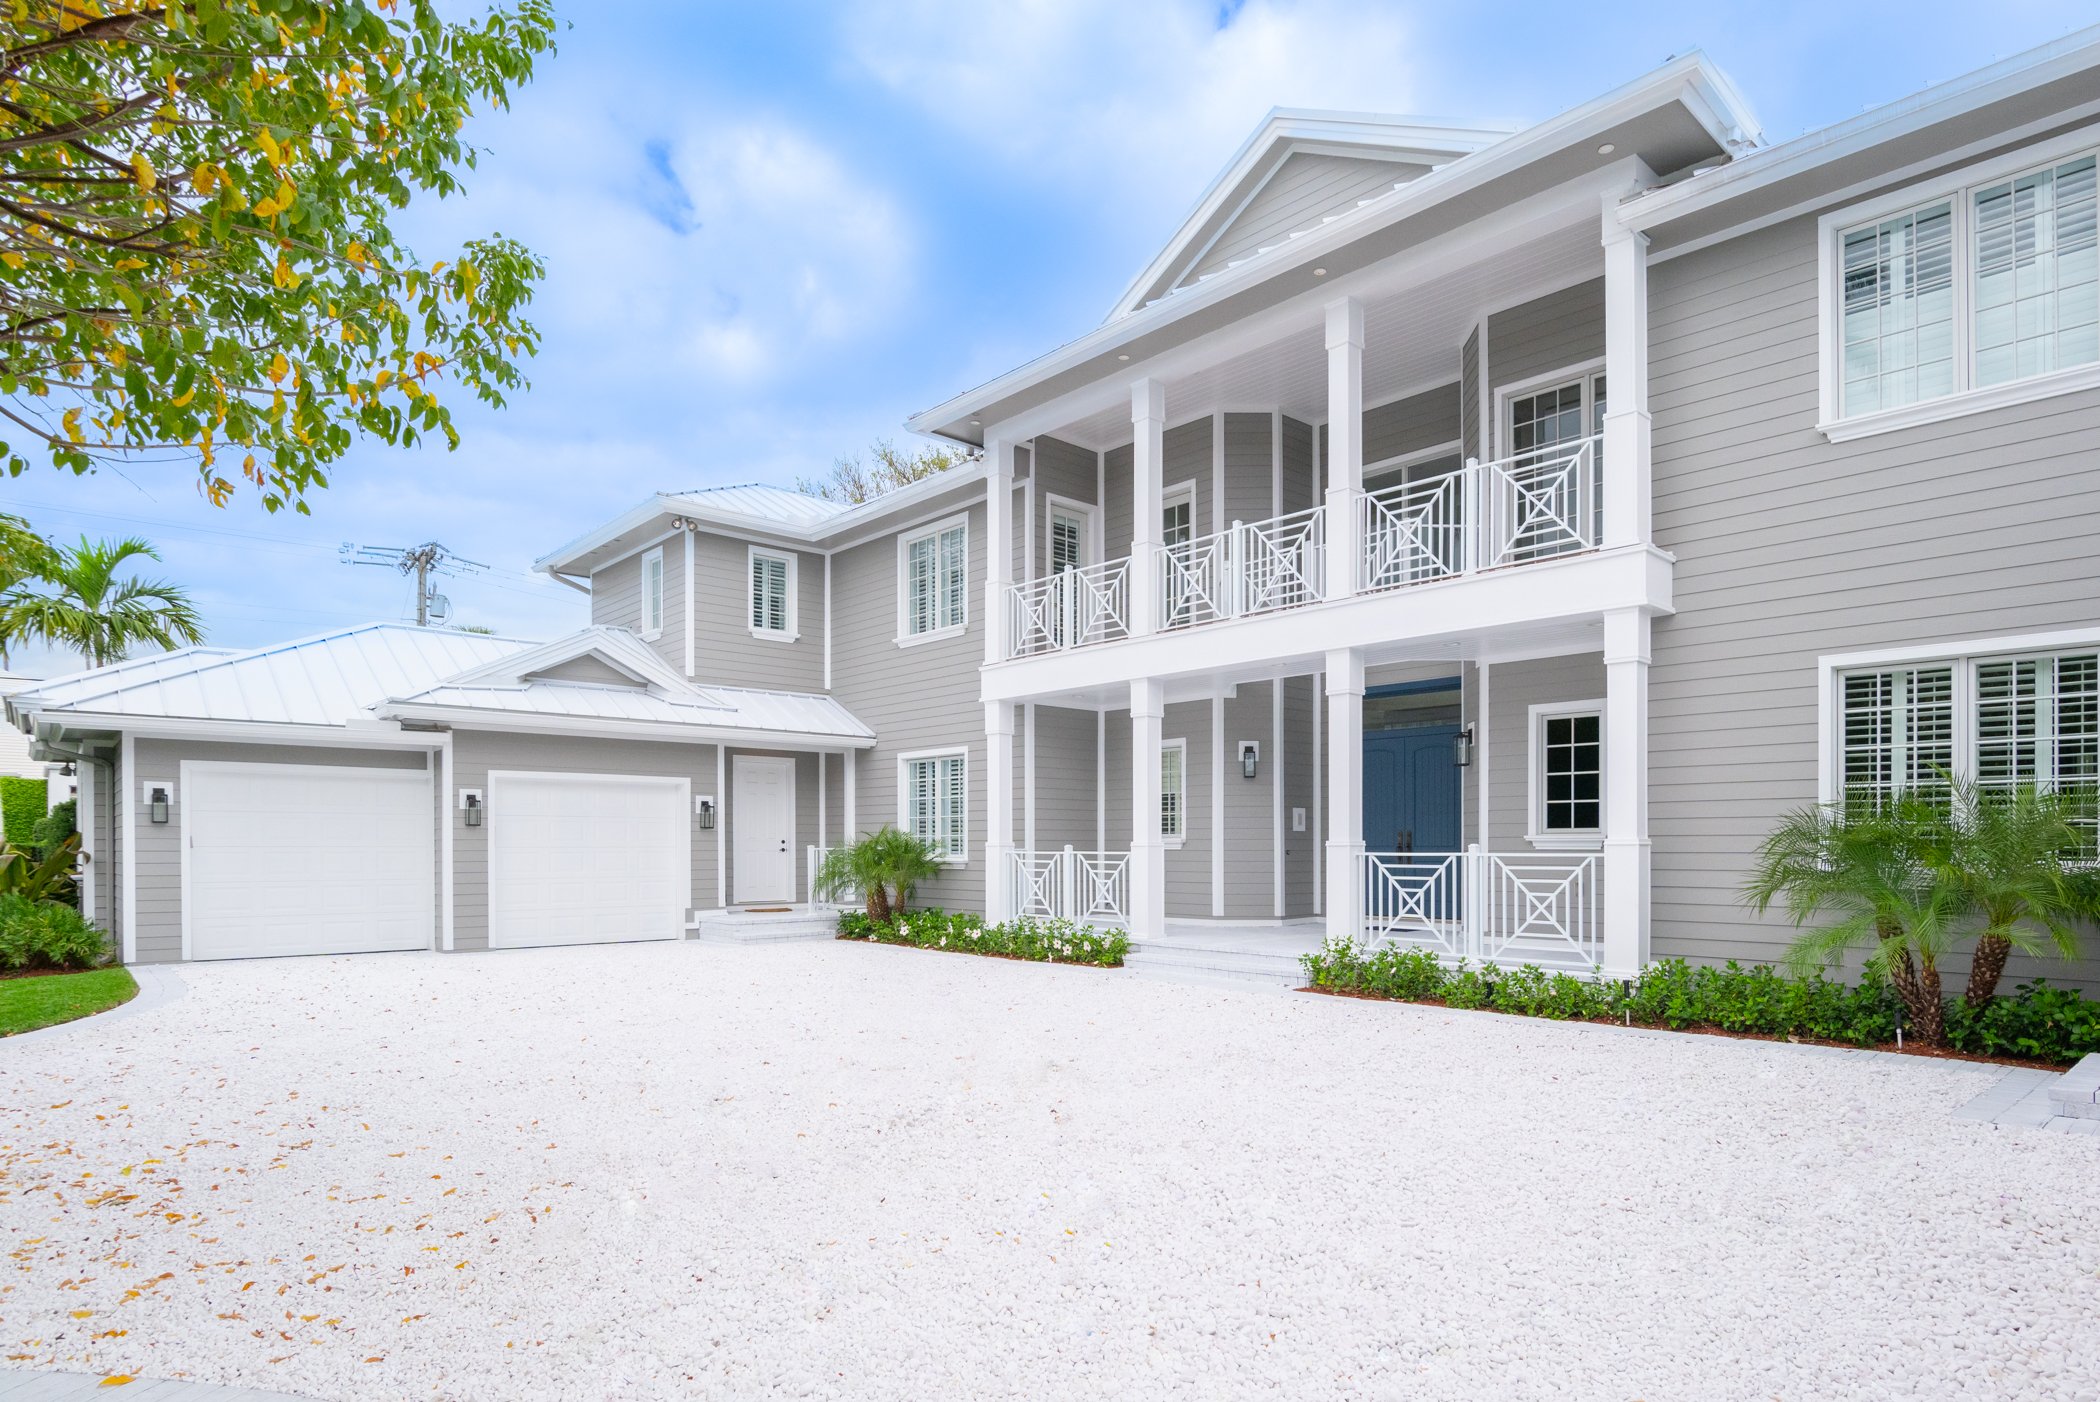 Check Out This Newly Renovated Coastal Contemporary In The Exclusive Point Manalapan Which Just Listed For $7.995 Million1.jpg